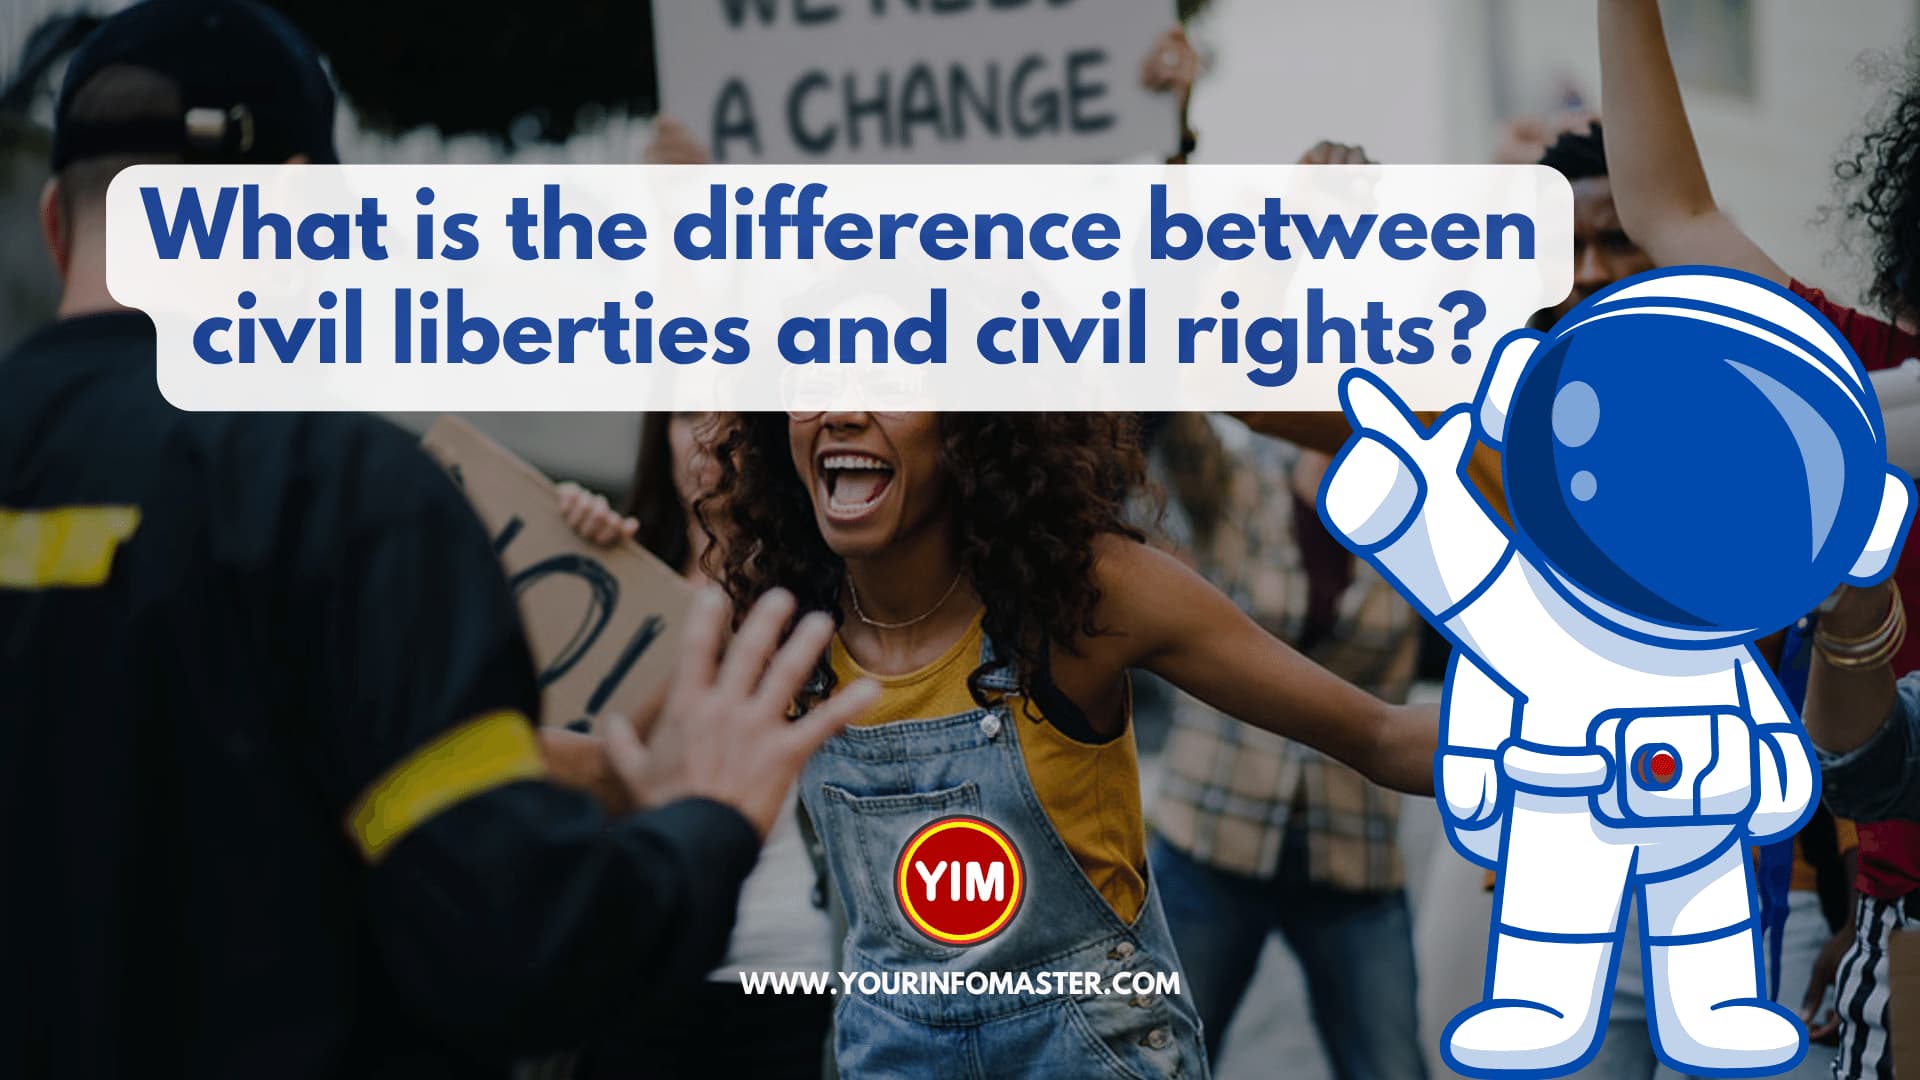 What is the difference between civil liberties and civil rights?